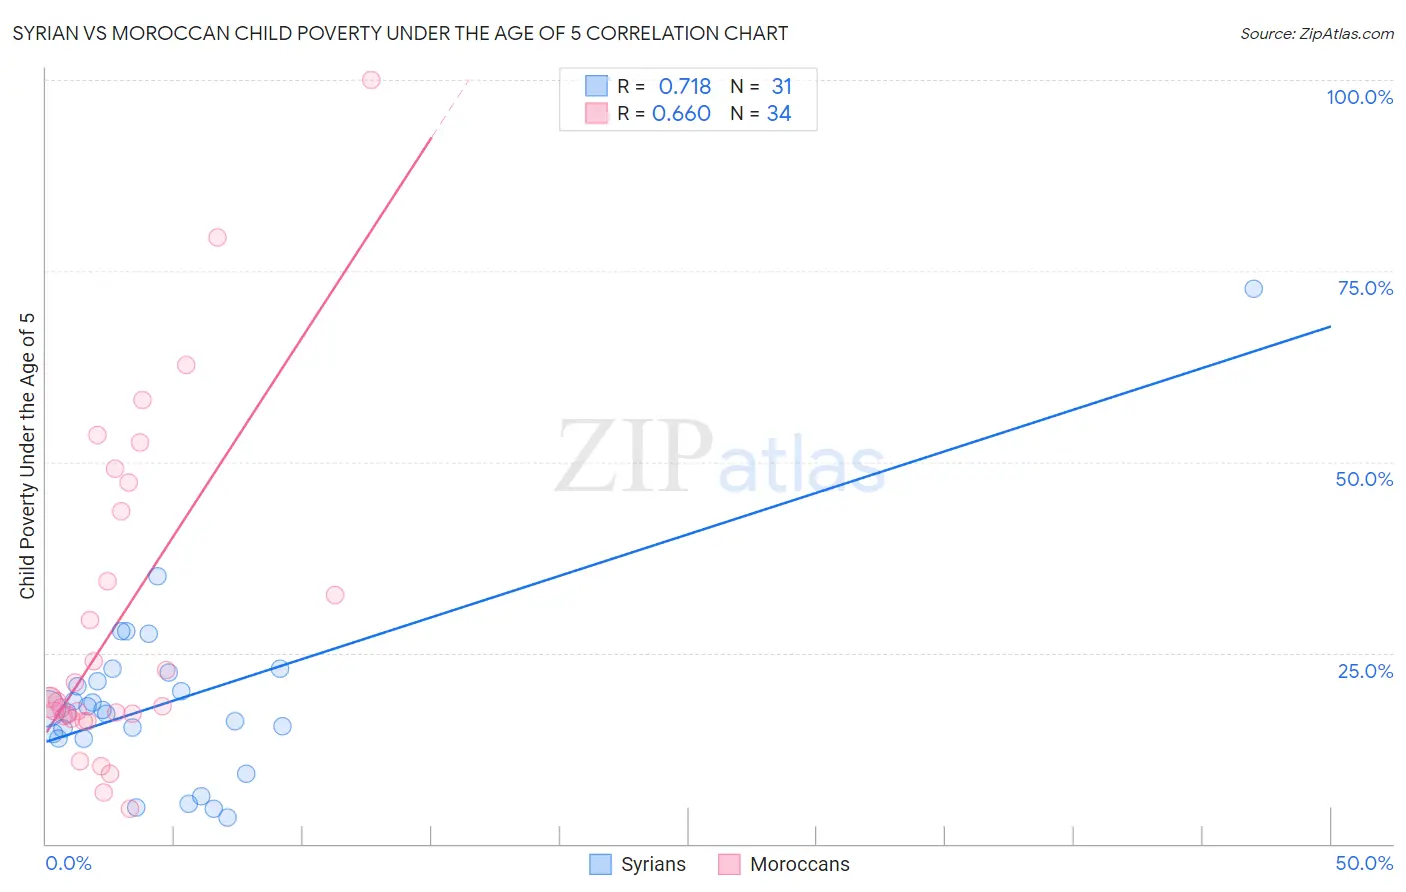 Syrian vs Moroccan Child Poverty Under the Age of 5